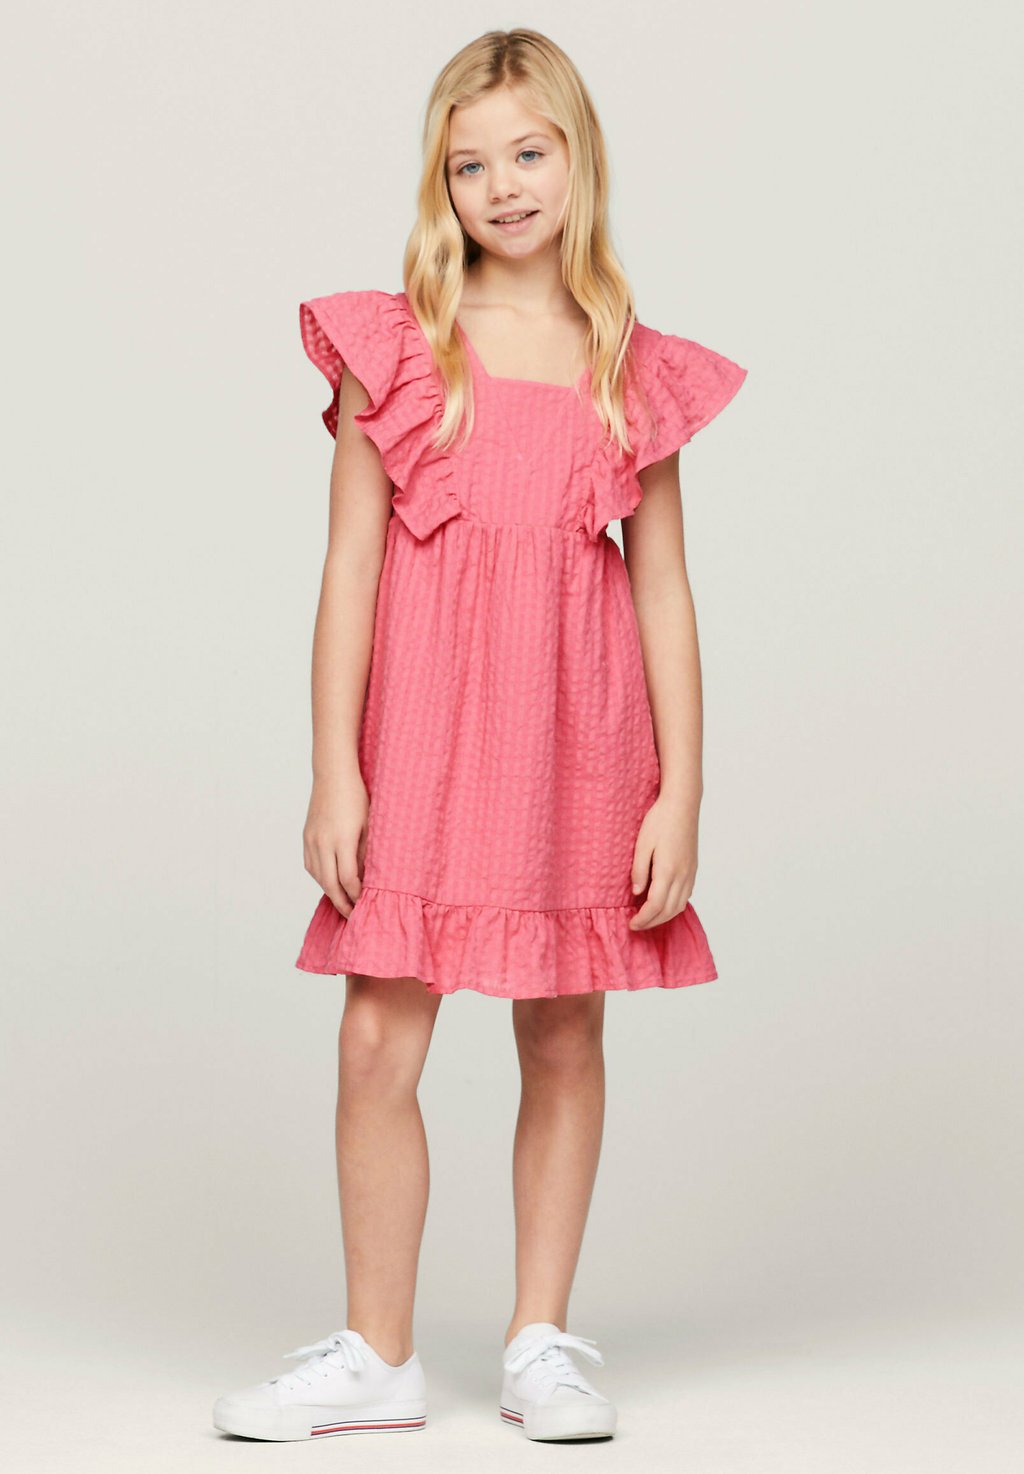 Летнее платье Frill Fit And Flare Tommy Hilfiger, цвет glamour pink платье tommy hilfiger fit and flare цвет sherbet